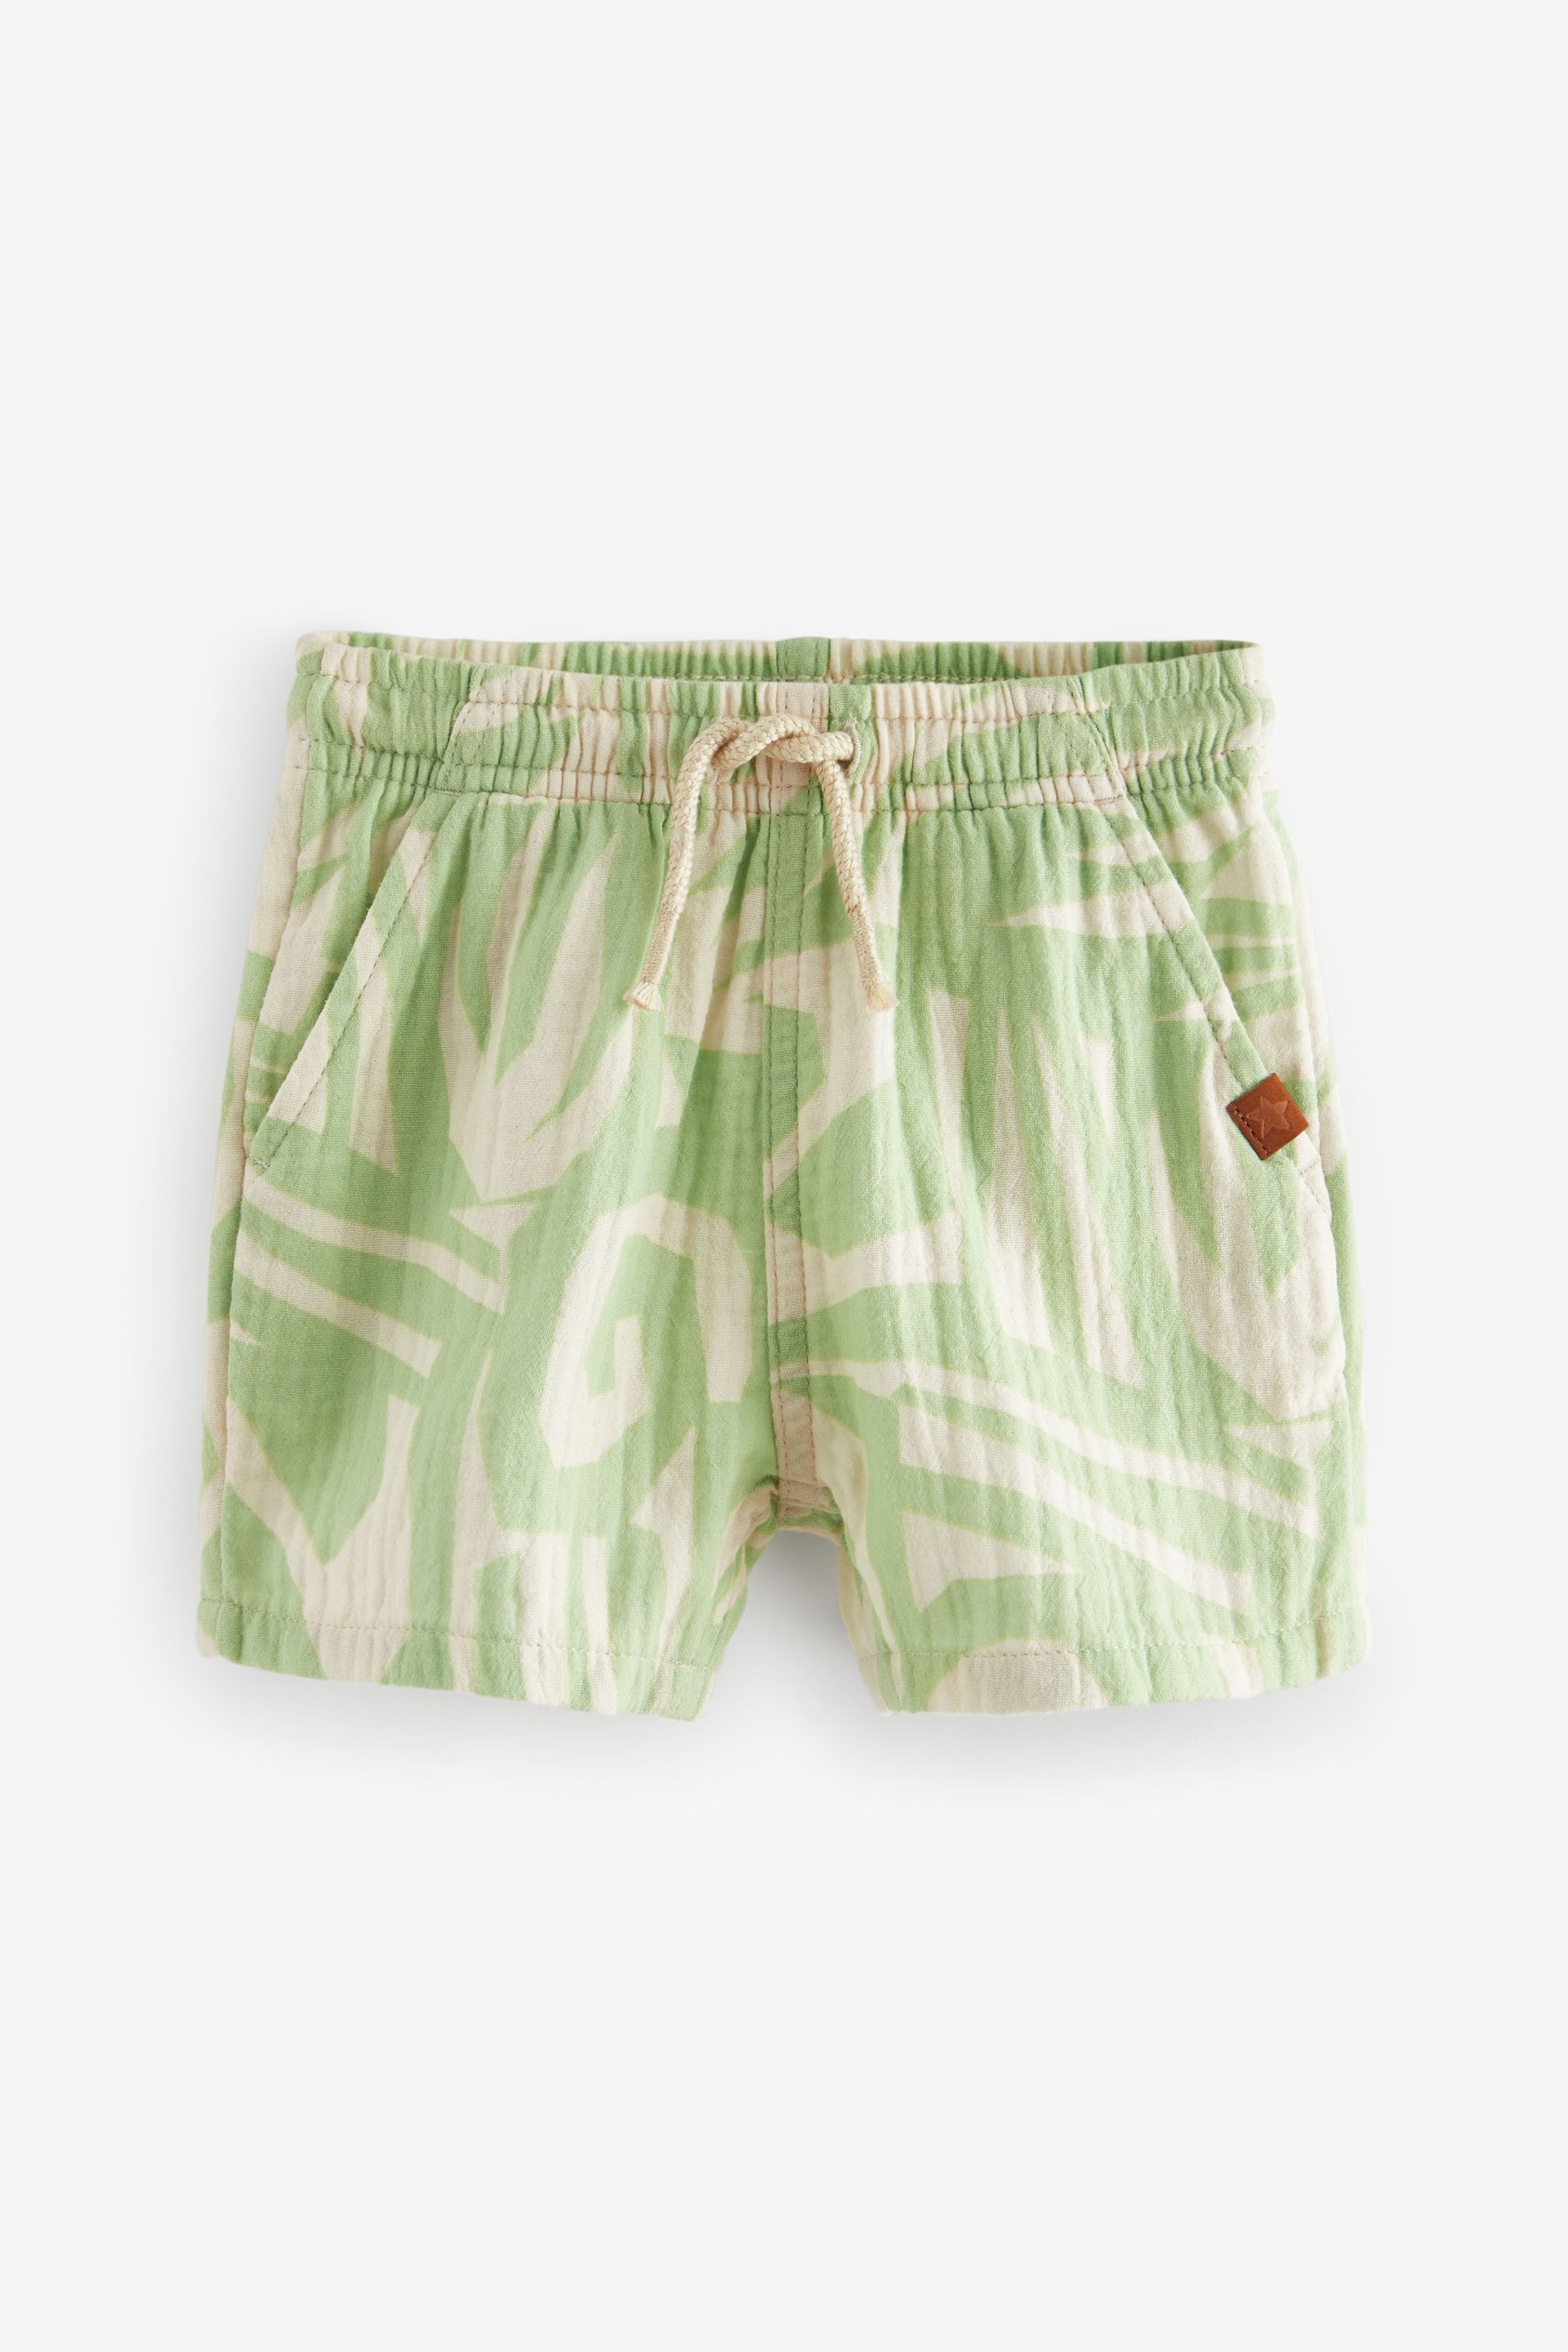 Mint Green Soft Textured Cotton Printed Shorts (3mths-7yrs) - Image 5 of 7